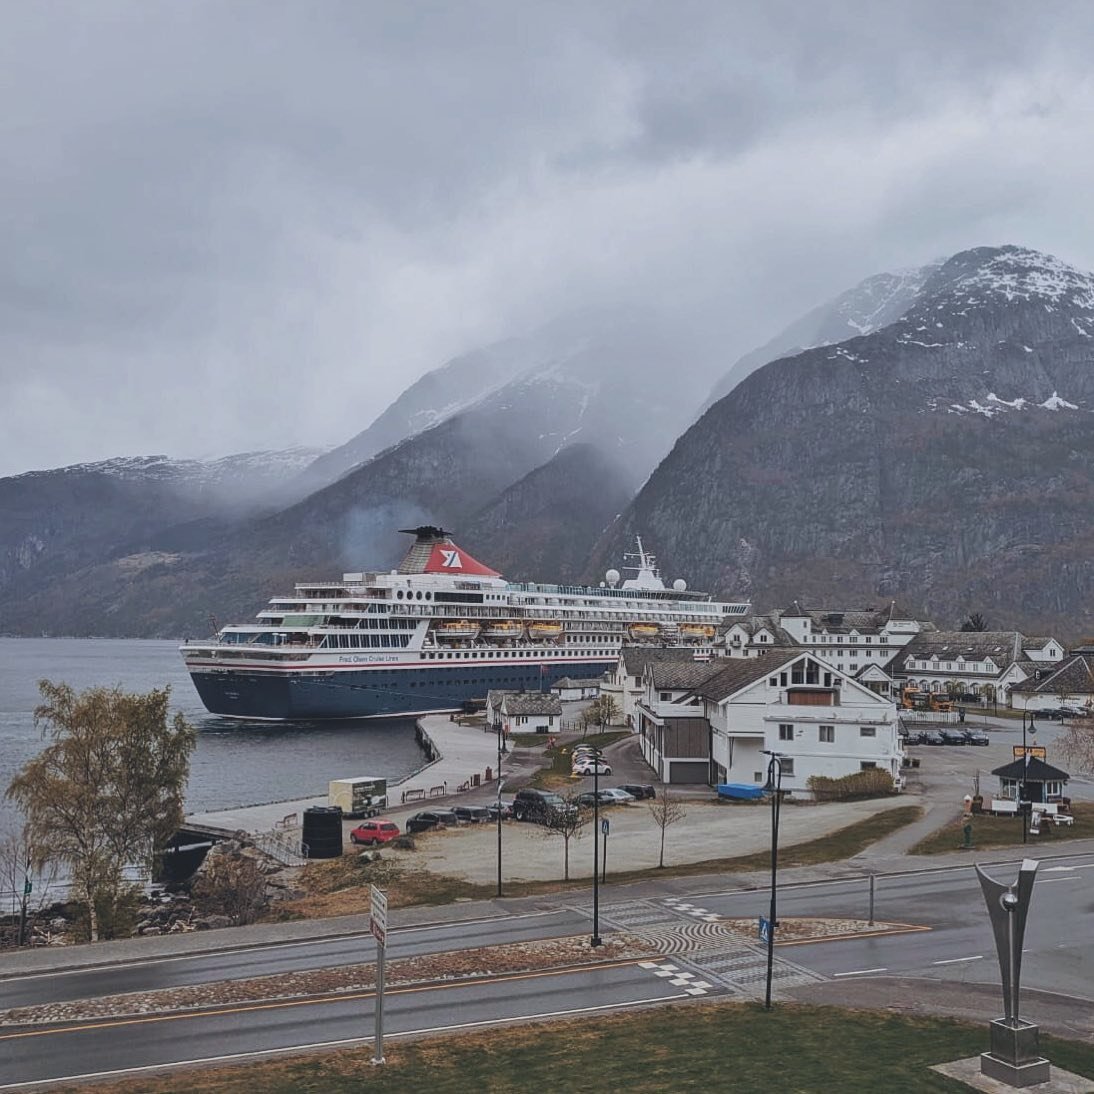 Lovely #balmoral in rainy Eidfjord today 🇳🇴

1000 takk to all the cruise guests who visited us at #norsknatursenter and brought sunshine to us ☀️☀️☀️

#eidfjord #balmoral #fredolsencruiselines #hardanger #norway #cruiseseason2024